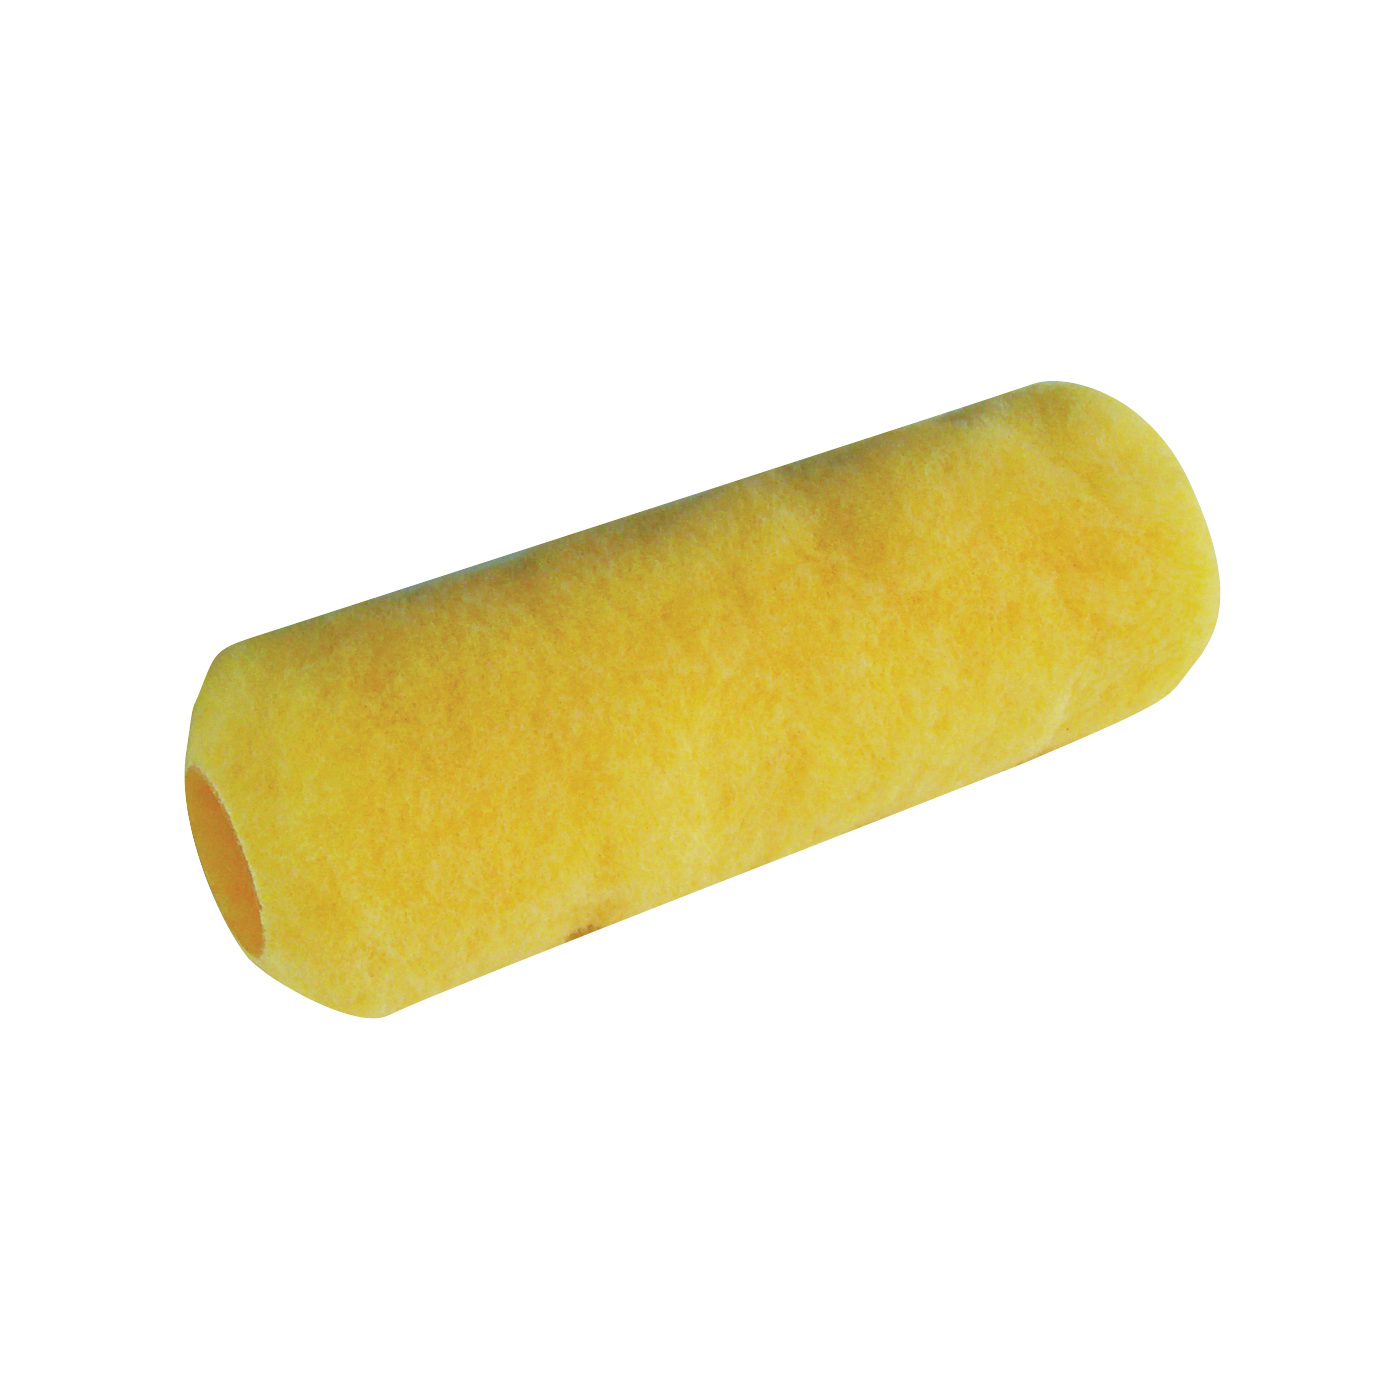 Linzer RC 145 Paint Roller Cover, 3/4 in Thick Nap, 9 in L, High-Density Polyester Cover